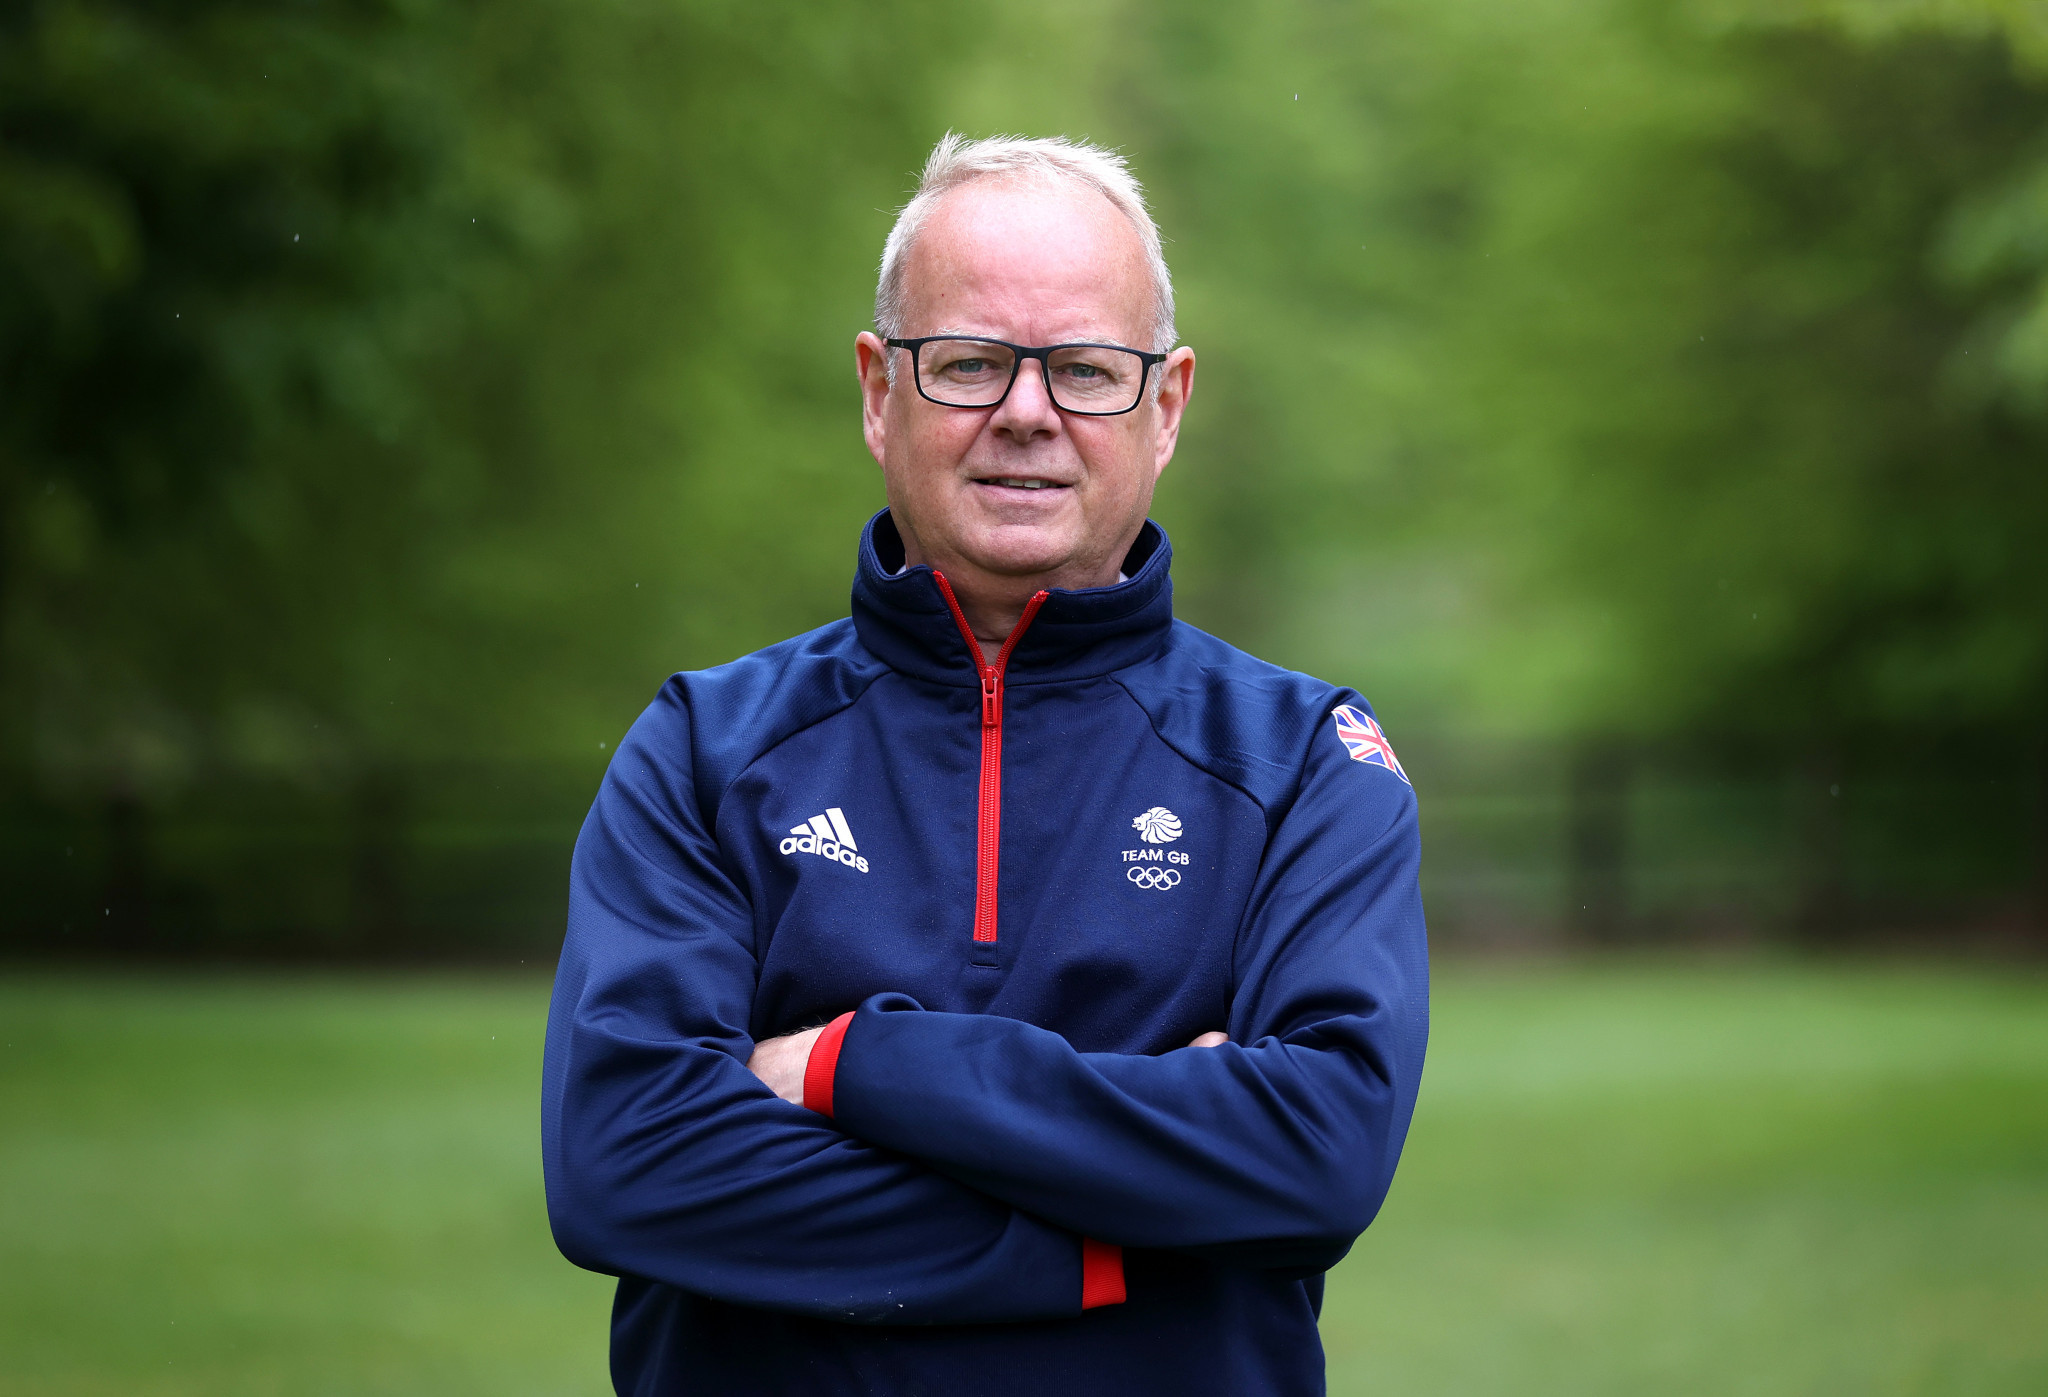 England's Chef de Mission for Birmingham 2022 Mark England said the agreement secured 